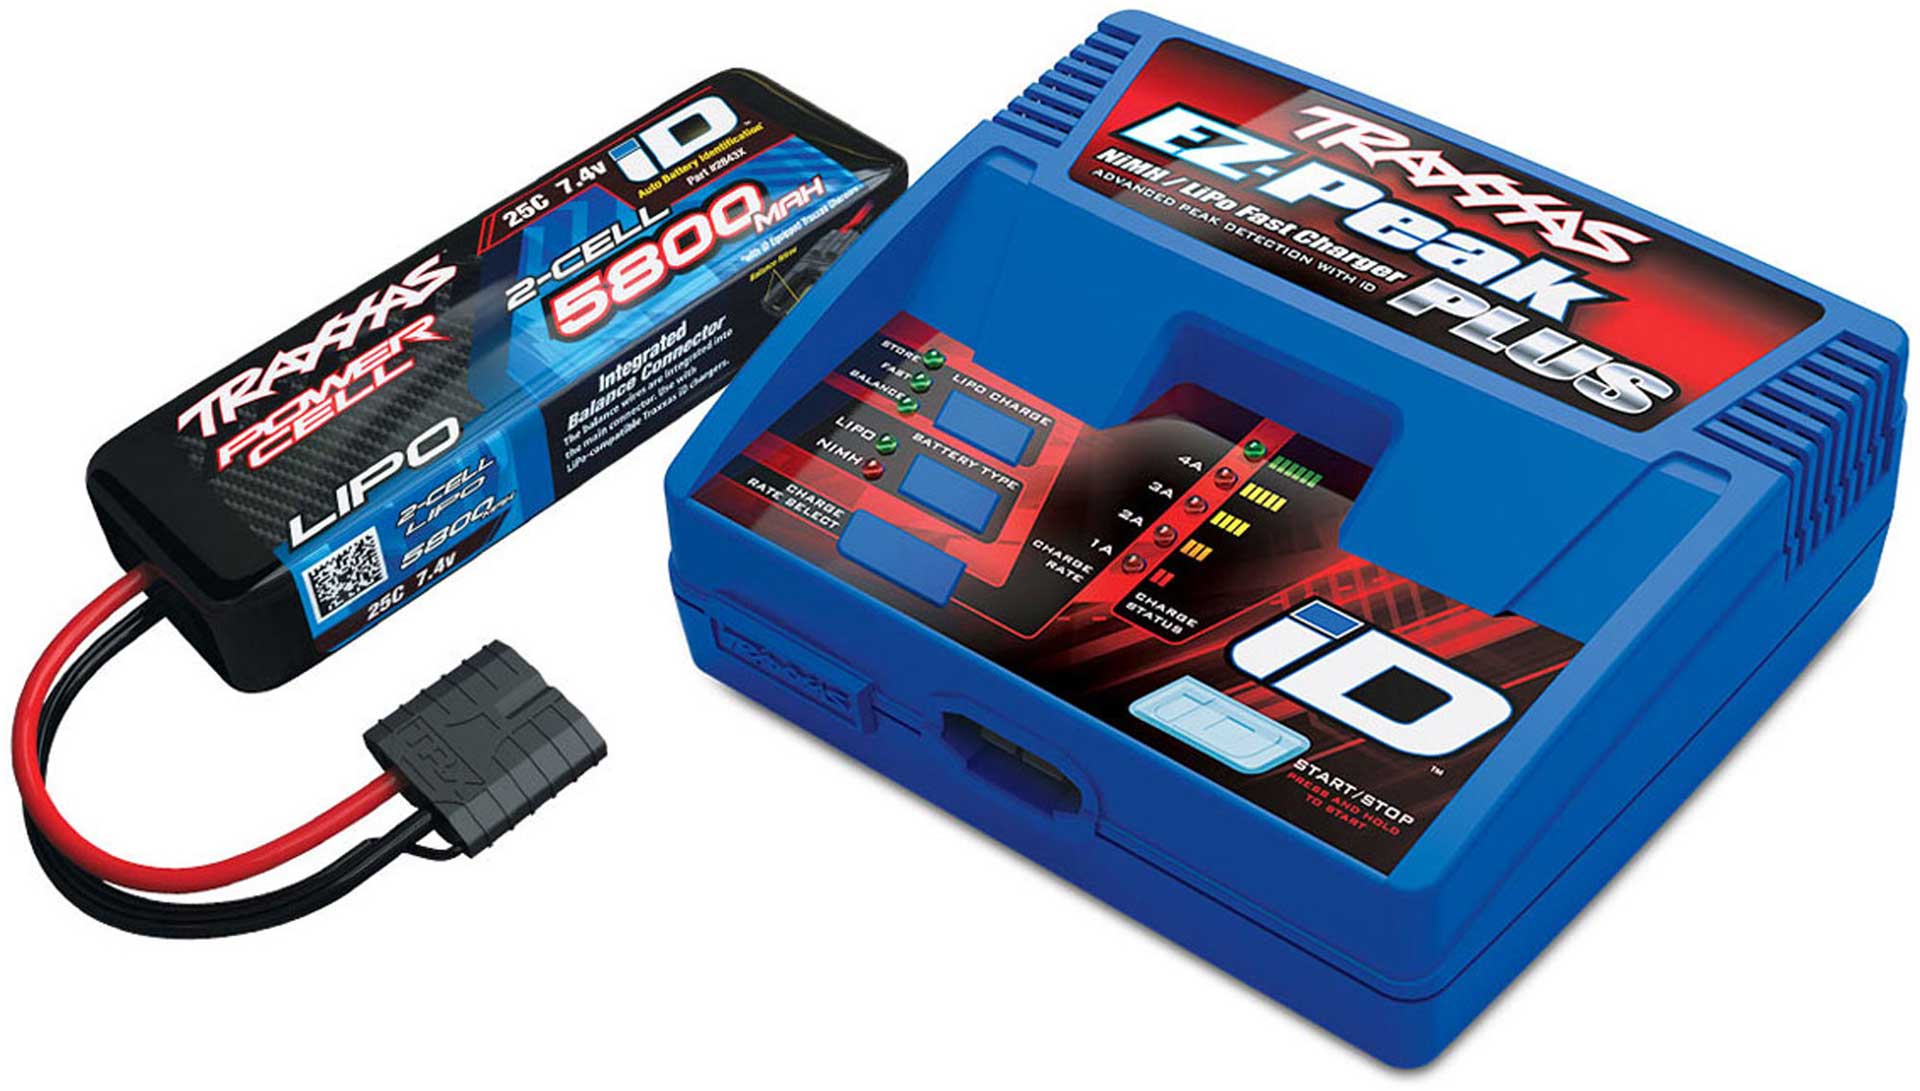 TRAXXAS EZ-PEAK PLUS CHARGER + 2S 5800MAH LIPO 25C WITH ID CONNECTOR ADD-ON PACKAGE VERSION 2018